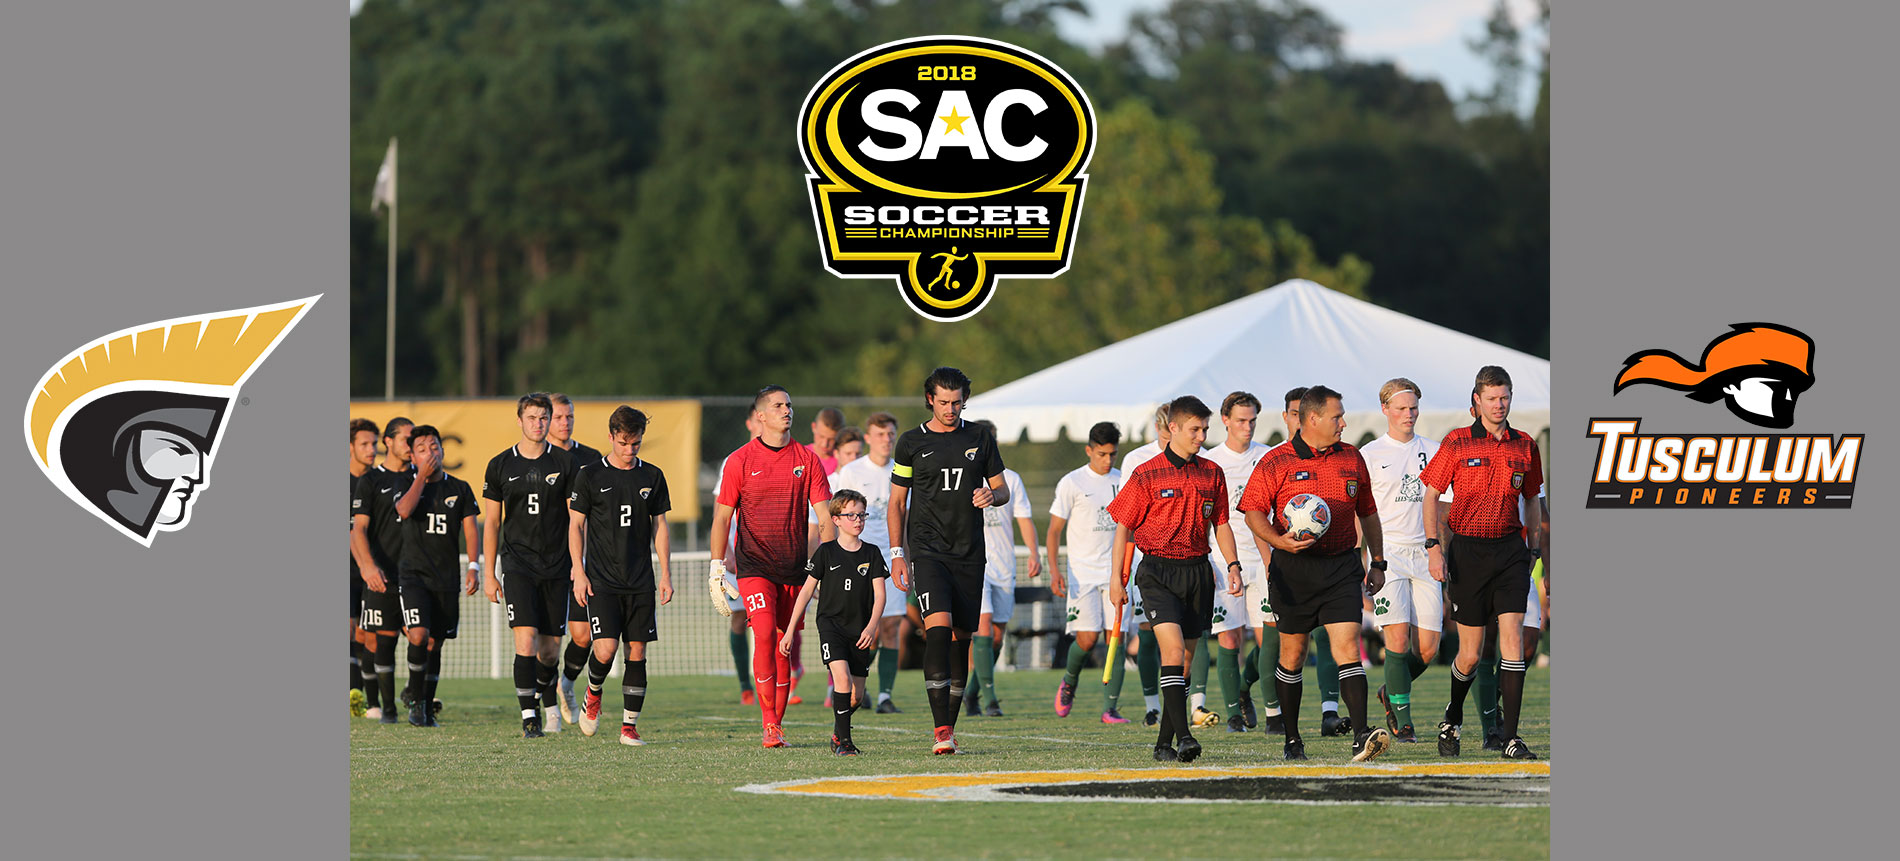 Men’s Soccer Seeks Fourth SAC Tournament Title Since Joining the Conference in 2010